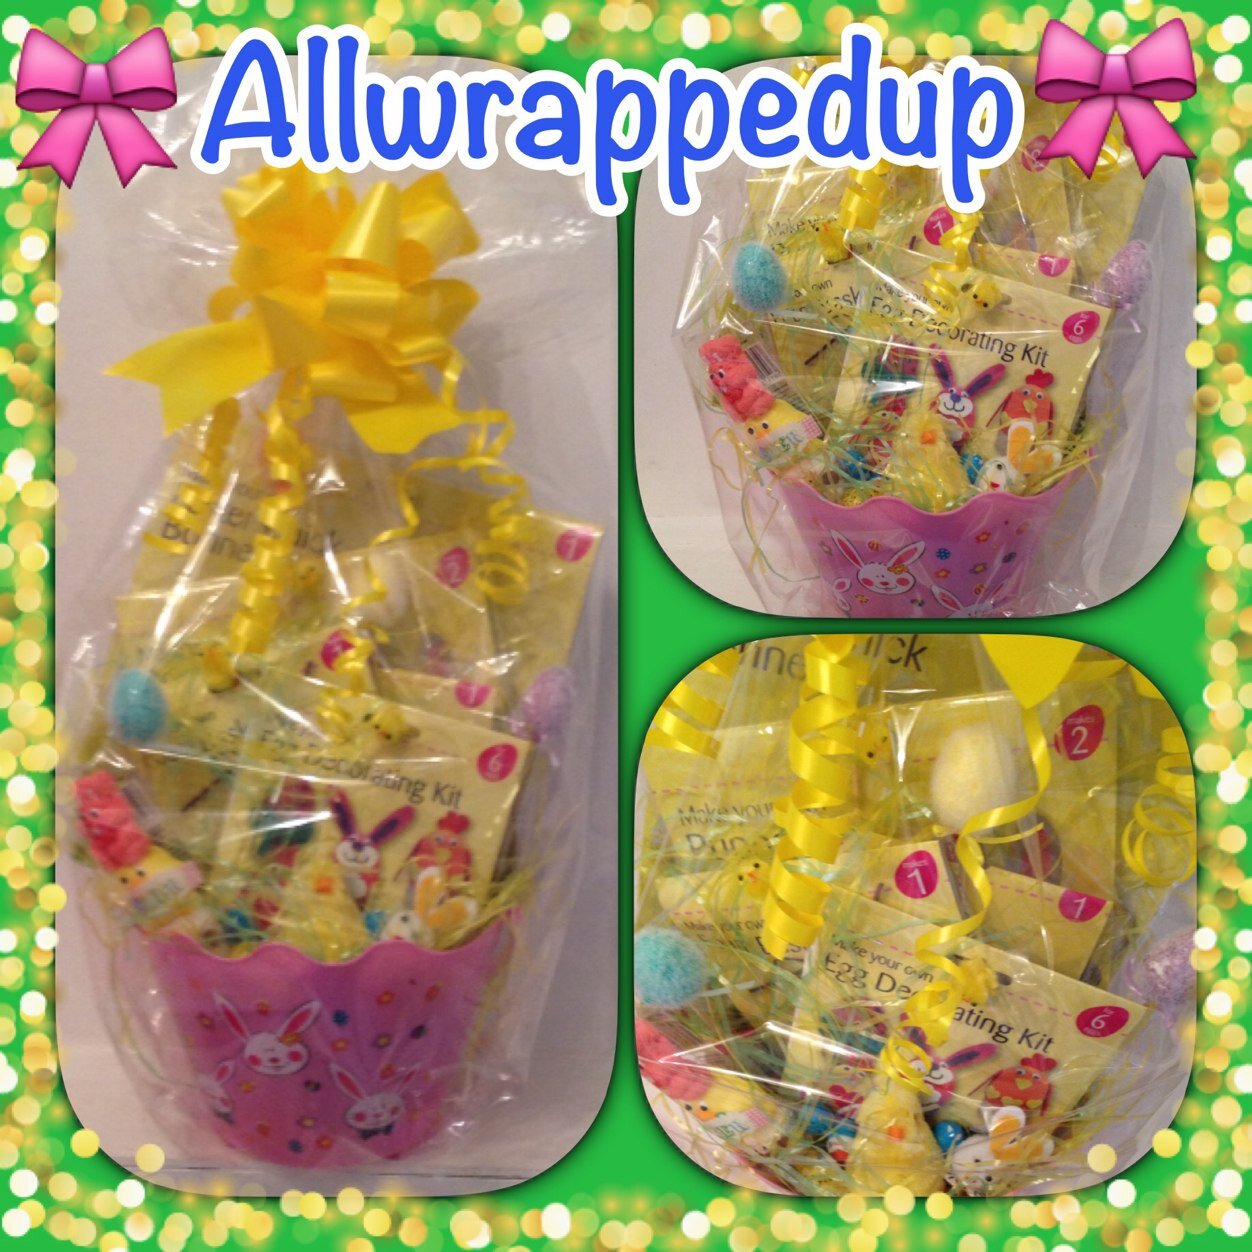 AllwrappedUp Fab gifts allwarppedUp for any occasion xx Birthday Hampers Ladies, Mens, Pamper Hampers Baby Hampers AllwrappedUp Amazing x
Based in Liverpool x